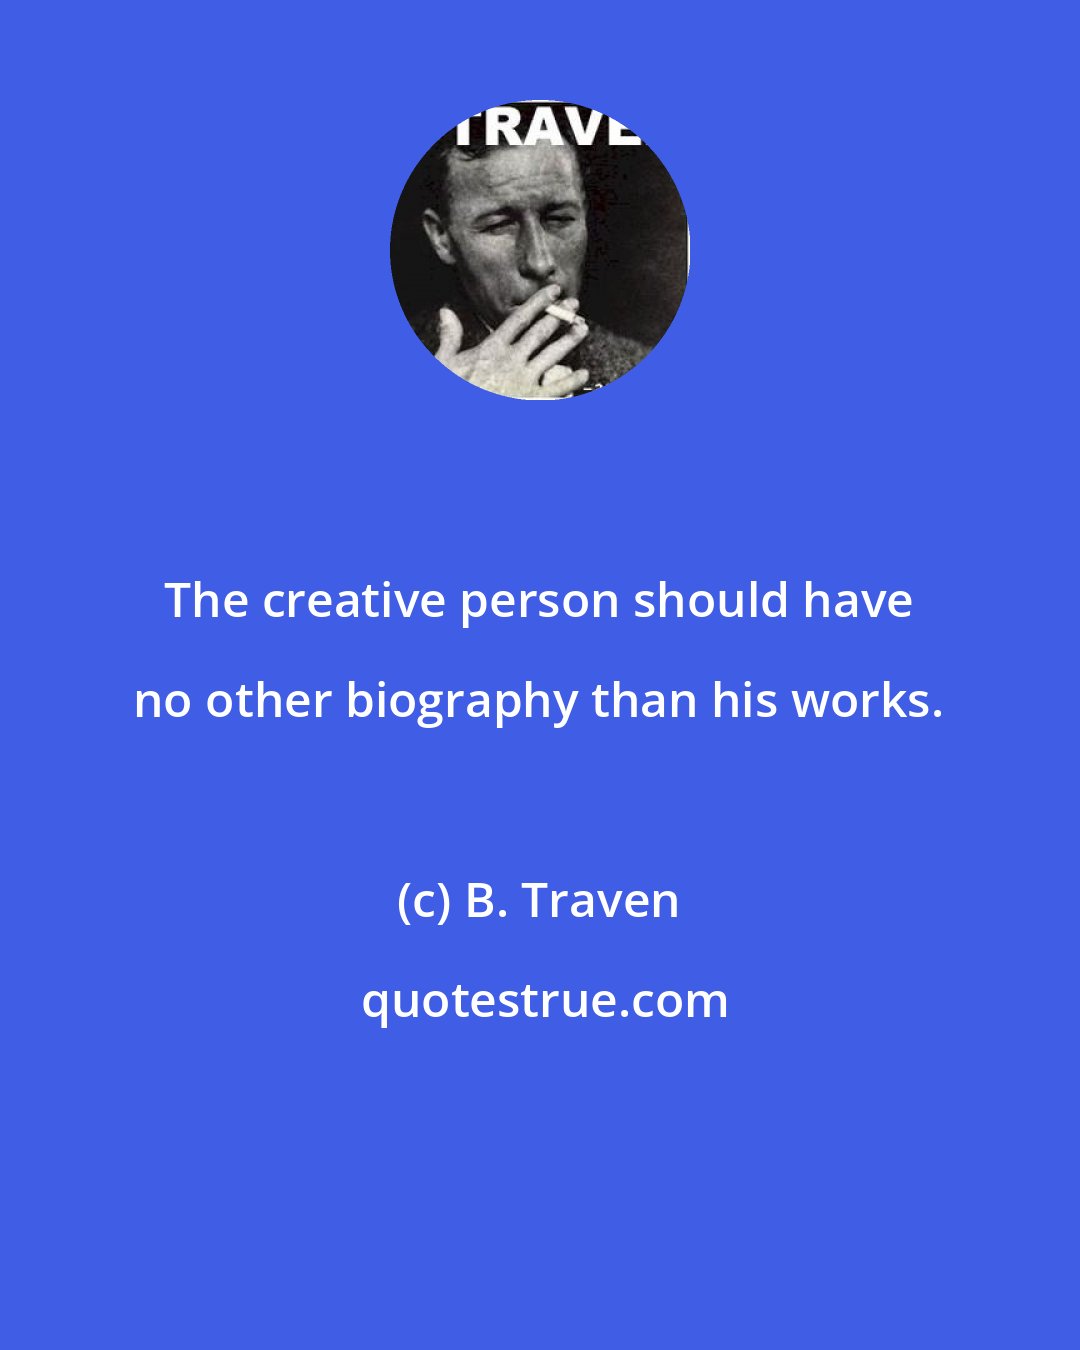 B. Traven: The creative person should have no other biography than his works.